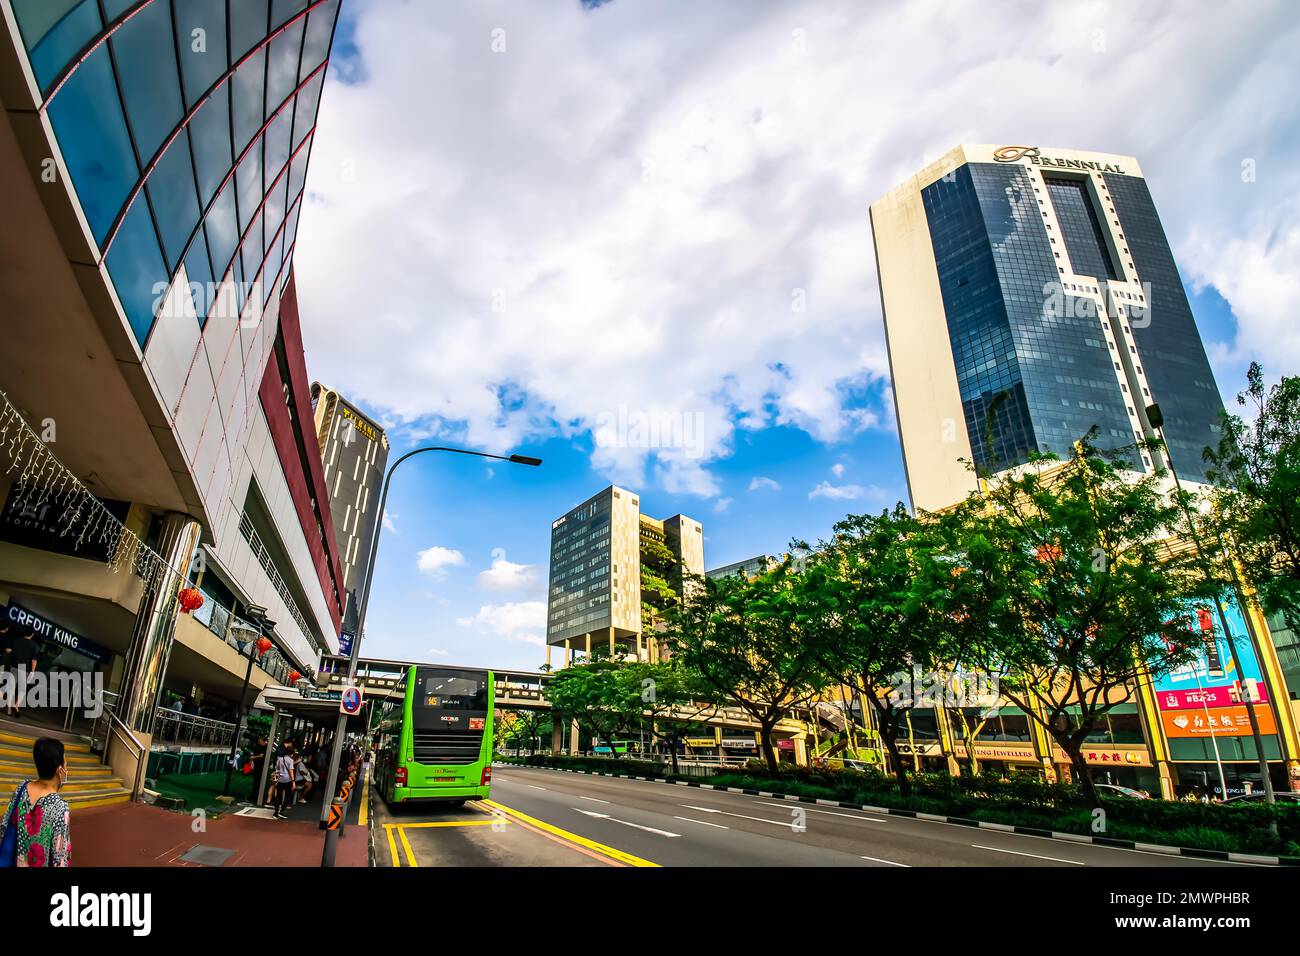 Travelling along Eu Tong Sen street with People's Park Centre, Chinatown Point, Furama City Centre and Parkroyal Collection Pickering in view. Stock Photo